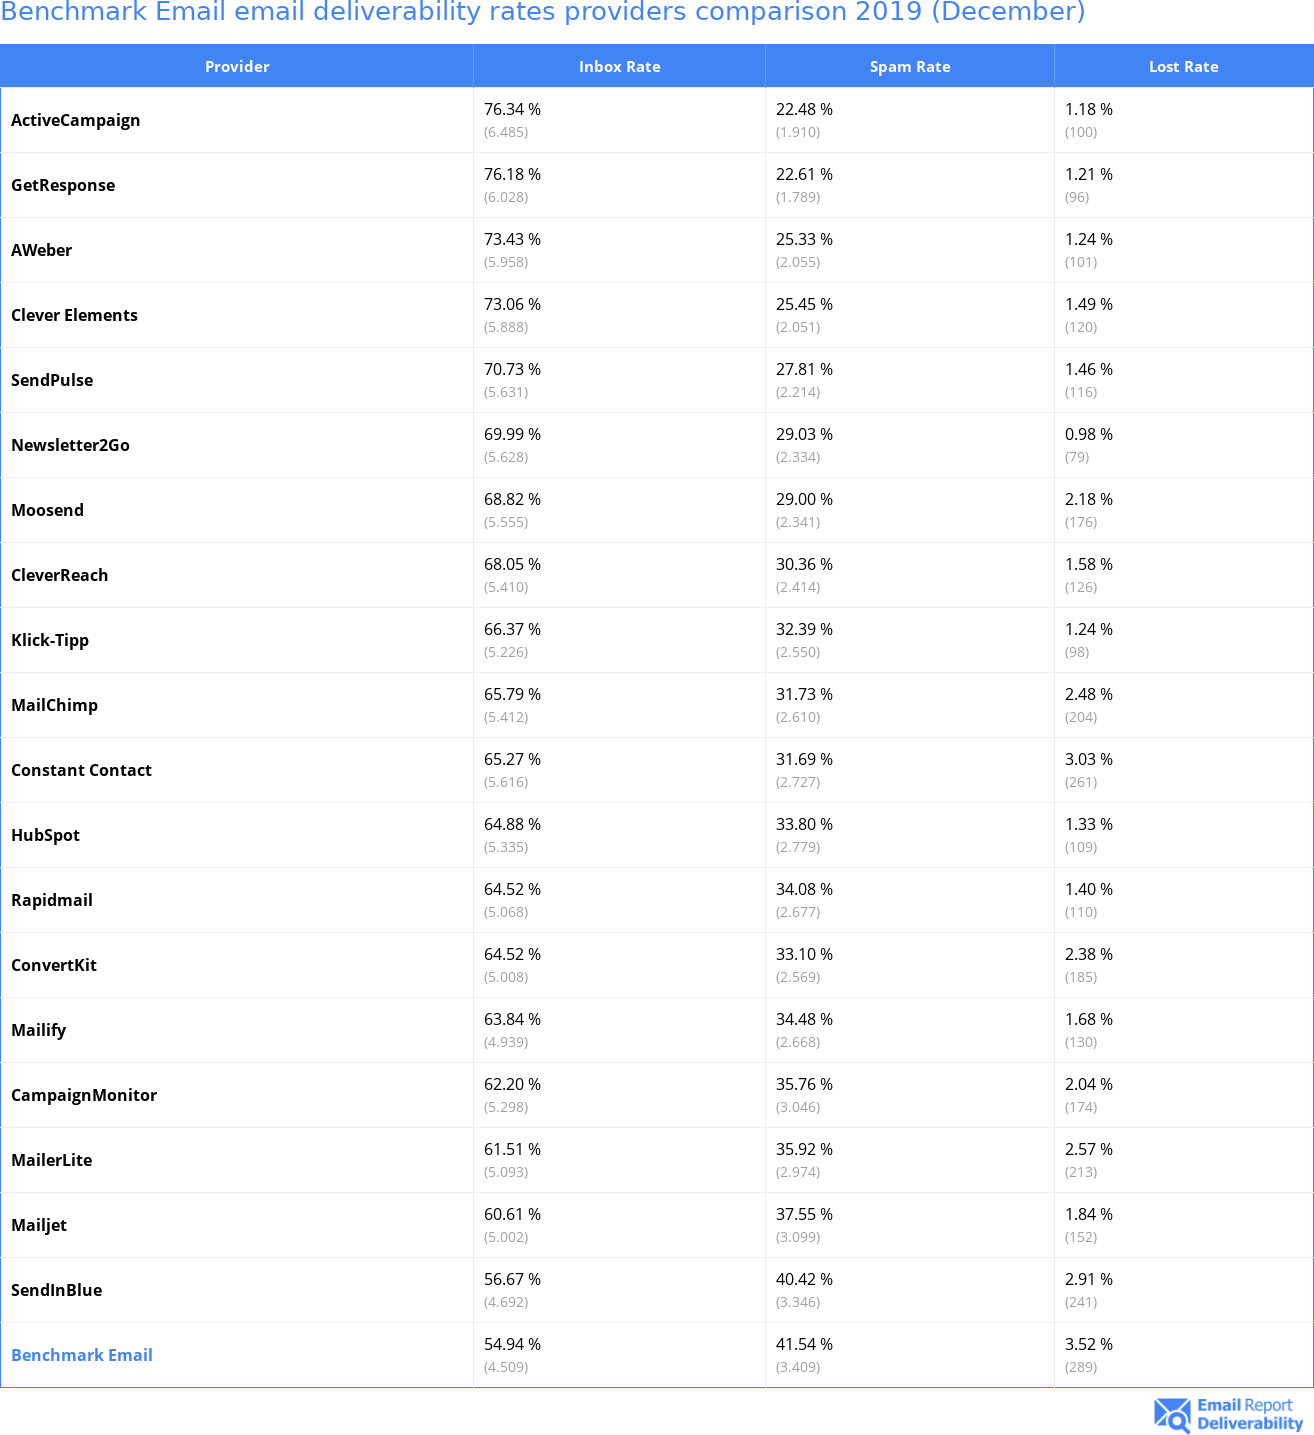 Benchmark Email email deliverability rates providers comparison 2019 (December)